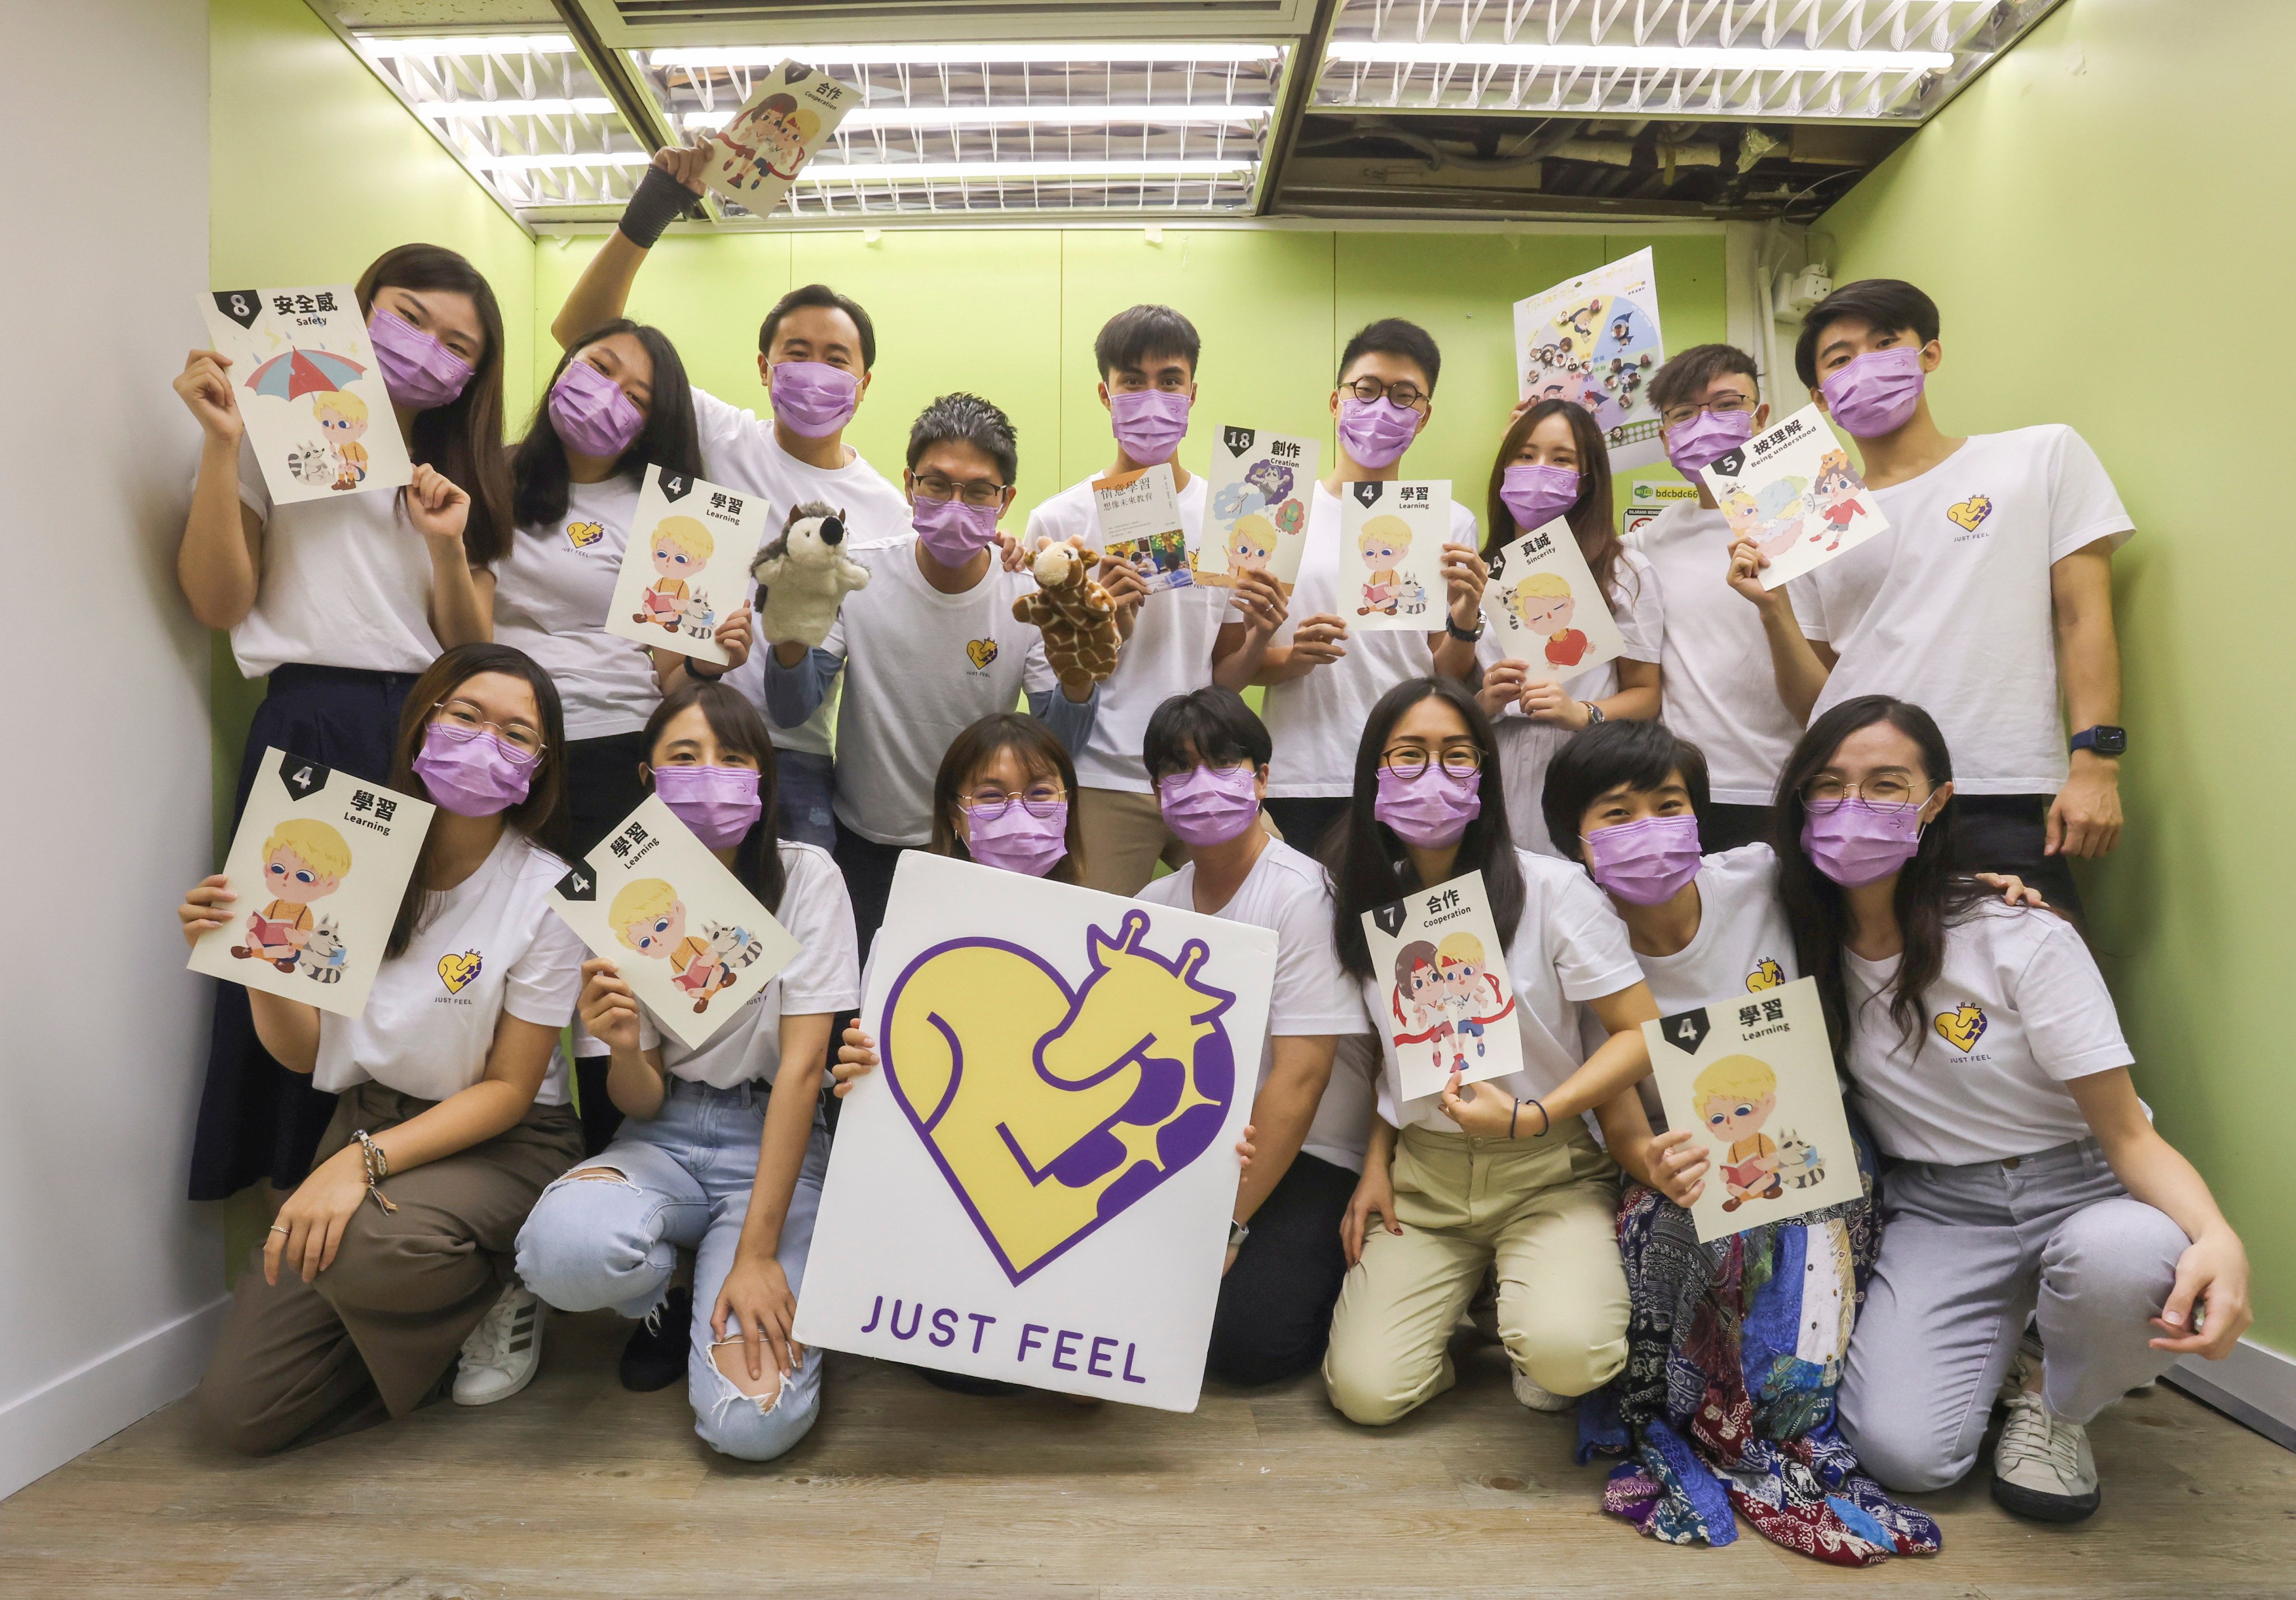 Hong Kong charity JUST FEEL has earned a nomination for the Spirit of Teamwork Award for its work with schoolchildren. Photo: Jonathan Wong